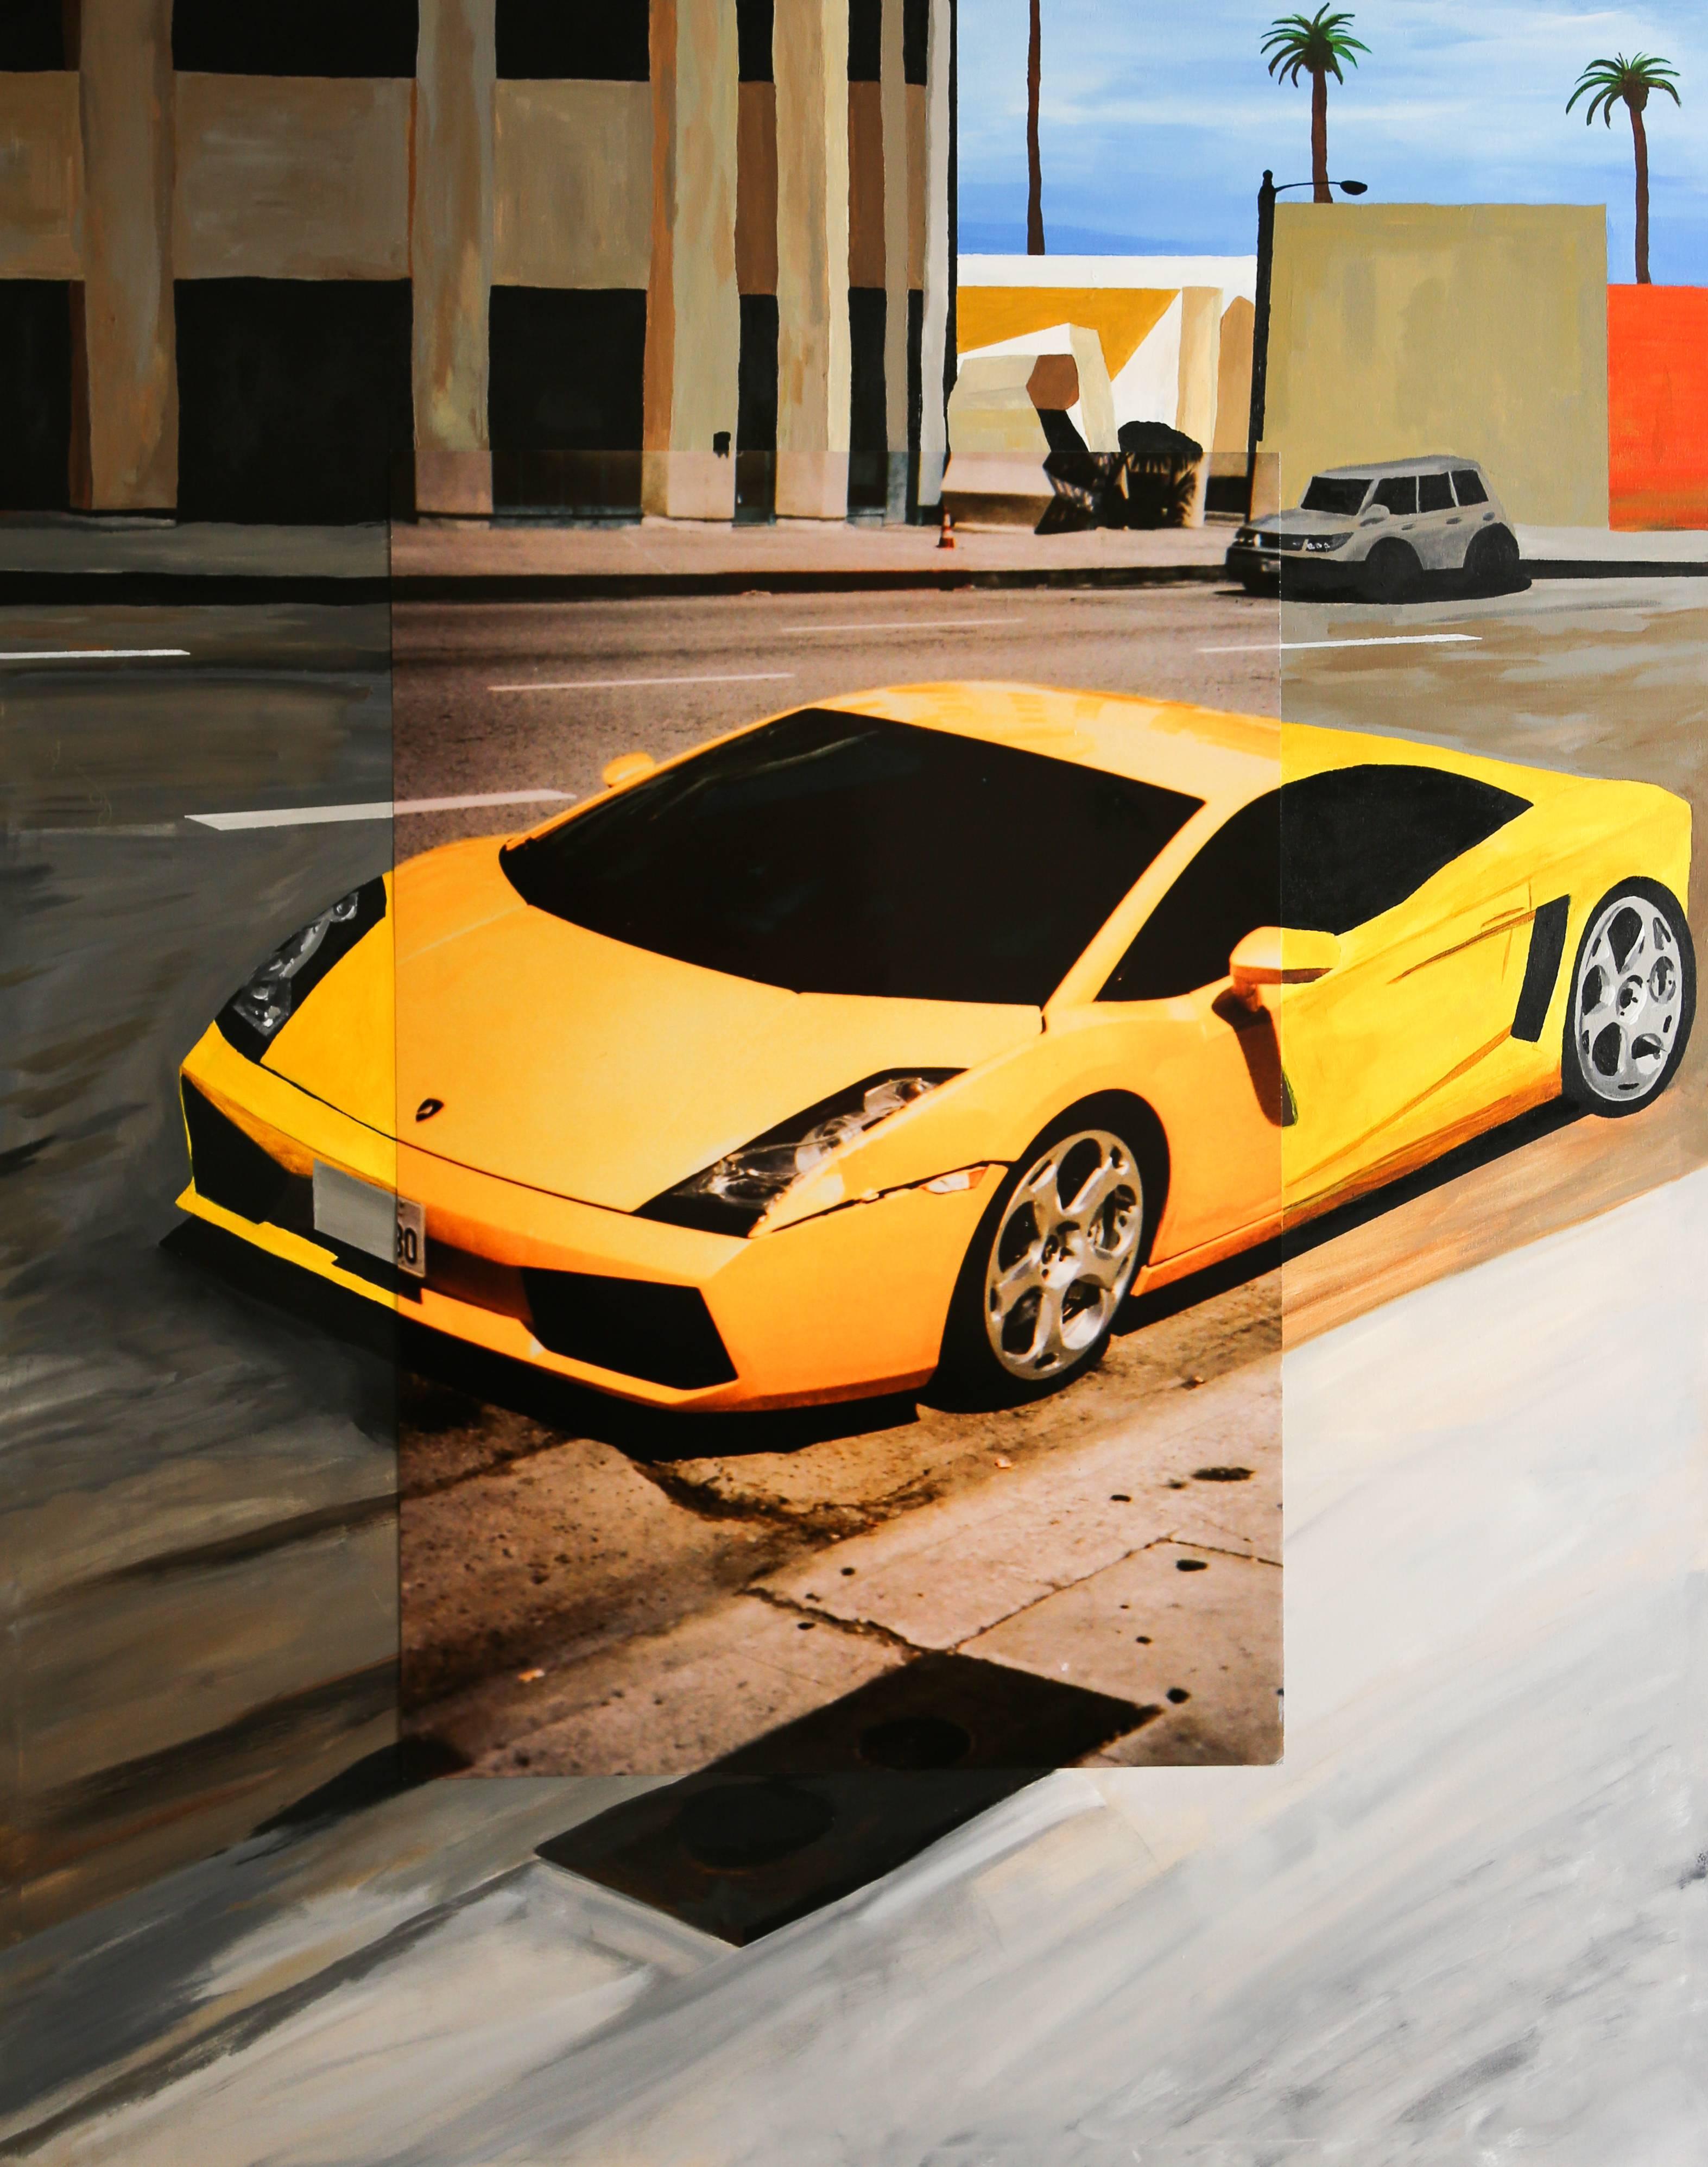 Lamborghini in Downtown Hollywood, Original, Acrylic Paint, Photograph, Signed - Mixed Media Art by Harry Cartwright